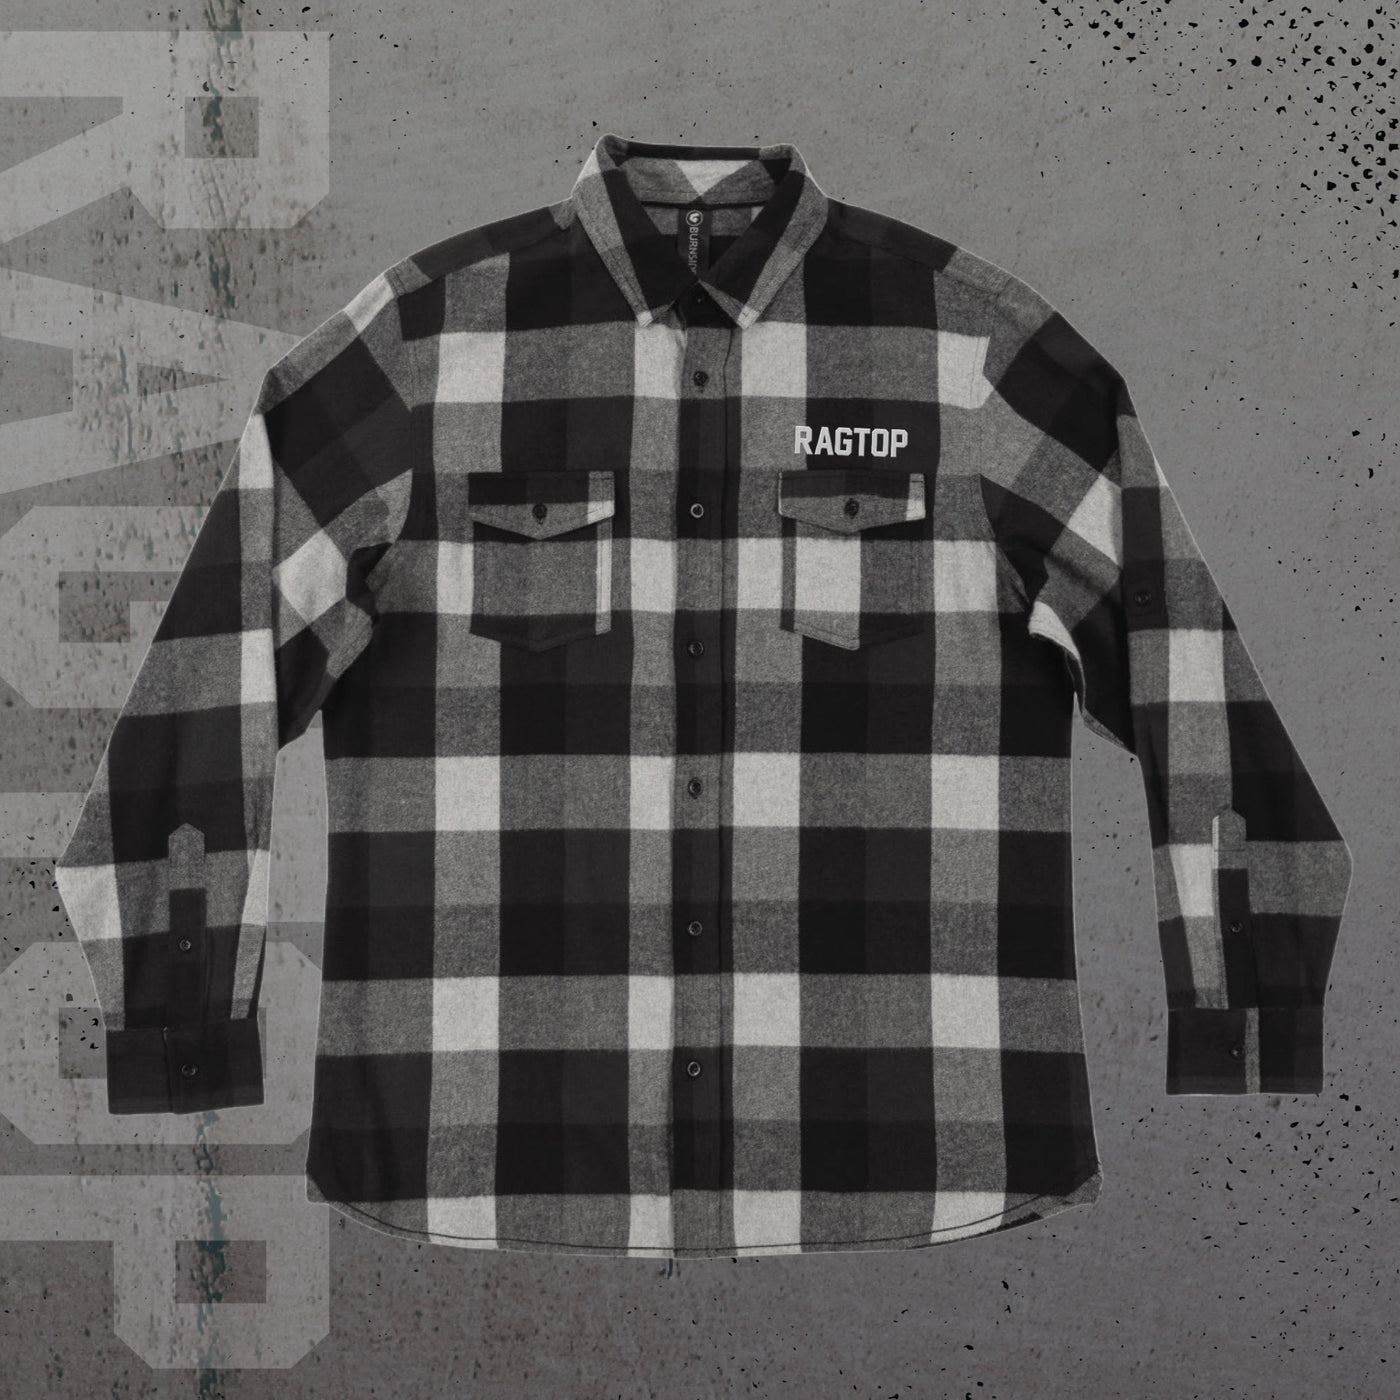 The Shop Flannel